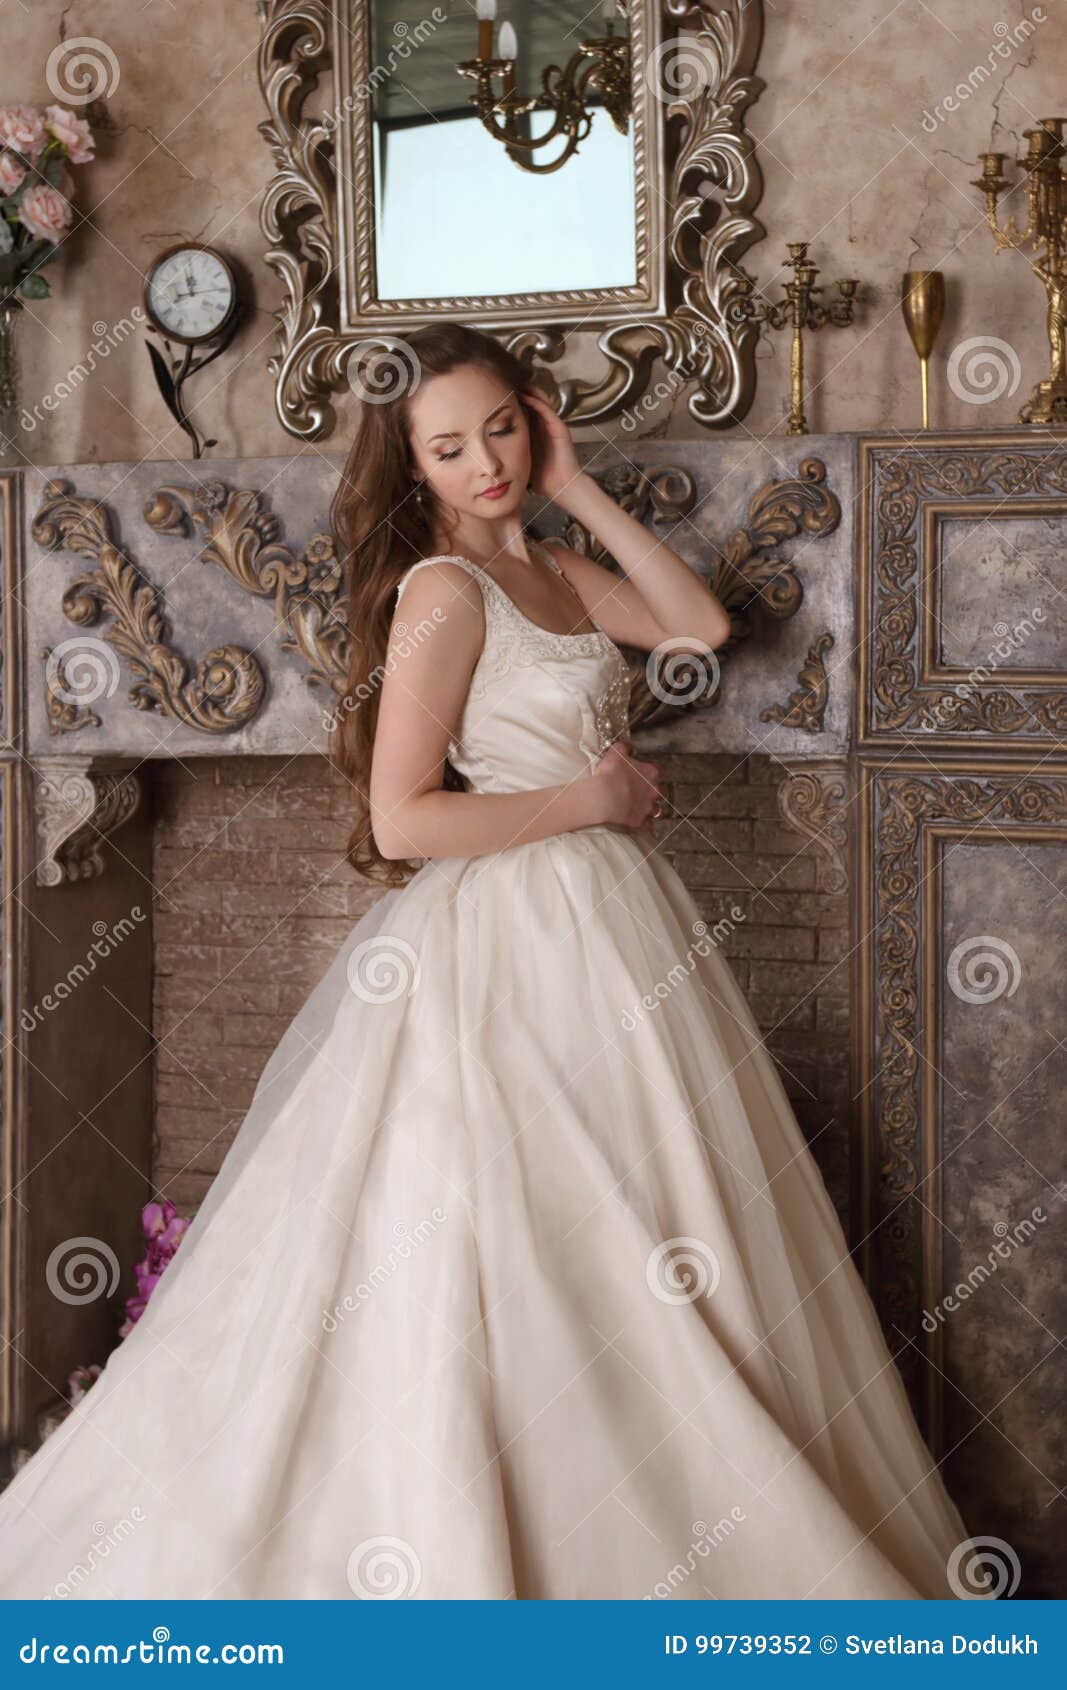 The Girl the Brunette in a Beautiful Dress Poses Sitting on a Floor Stock  Photo - Image of girl, cheerful: 124328970